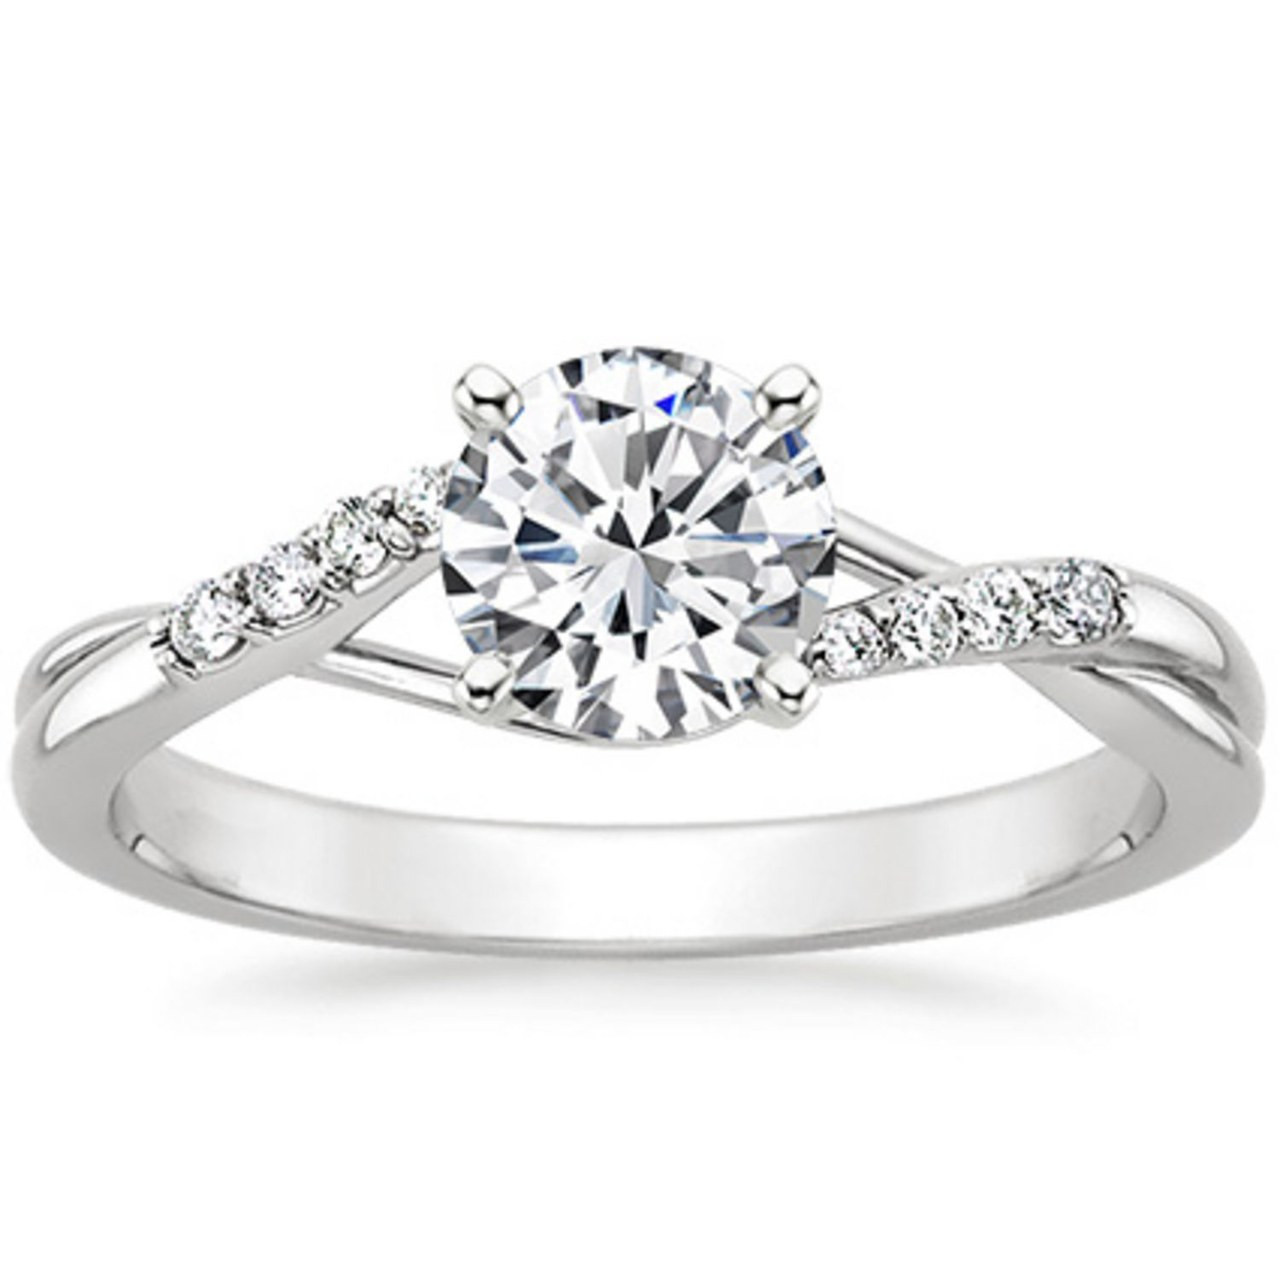 Conflict Free Diamond Engagement Rings
 3 Sparkly New Engagement Rings 1 Lovely Wedding Band